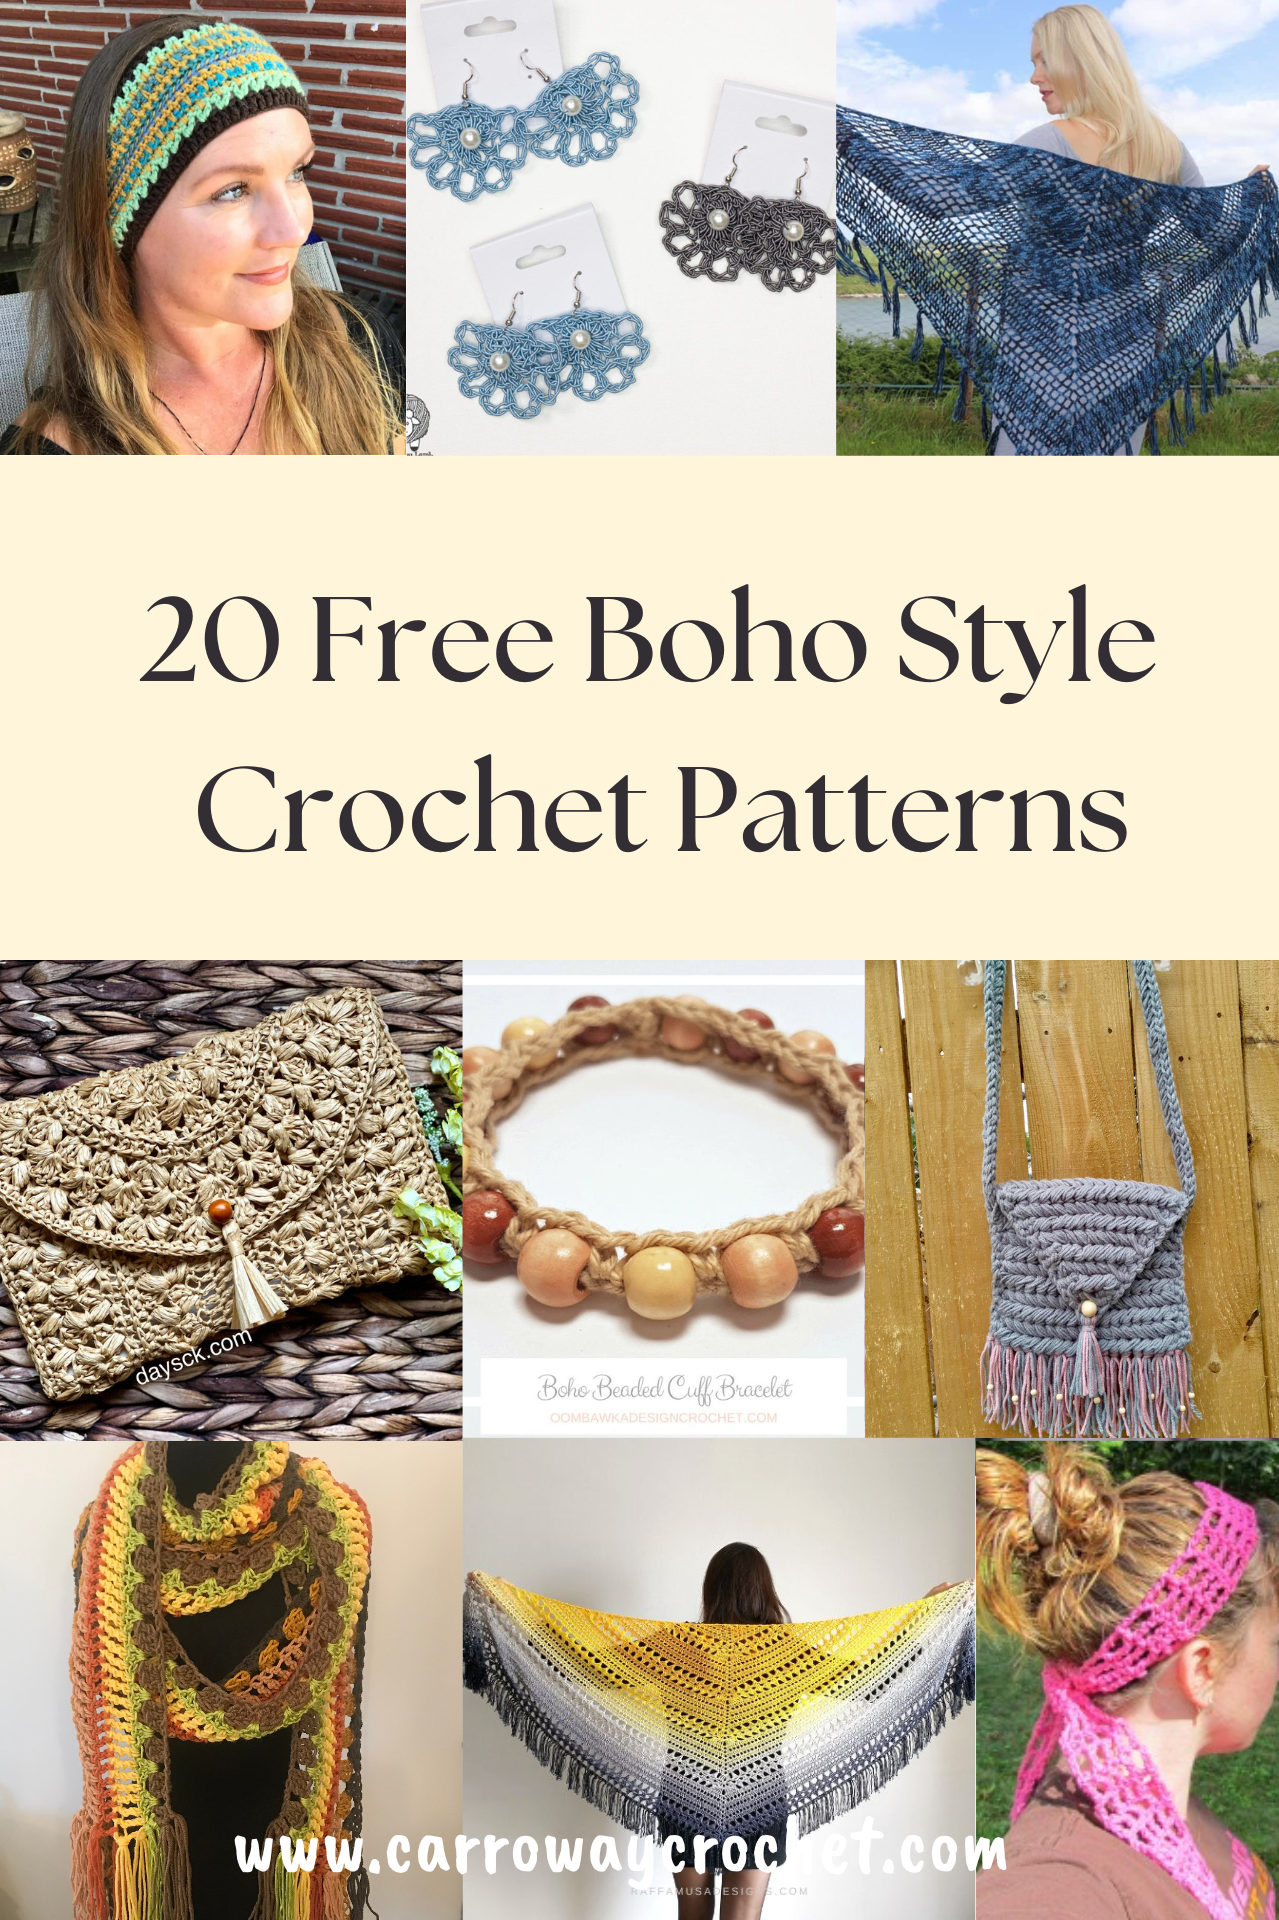 20 Free Crochet Granny Squares Patterns - Made by Gootie